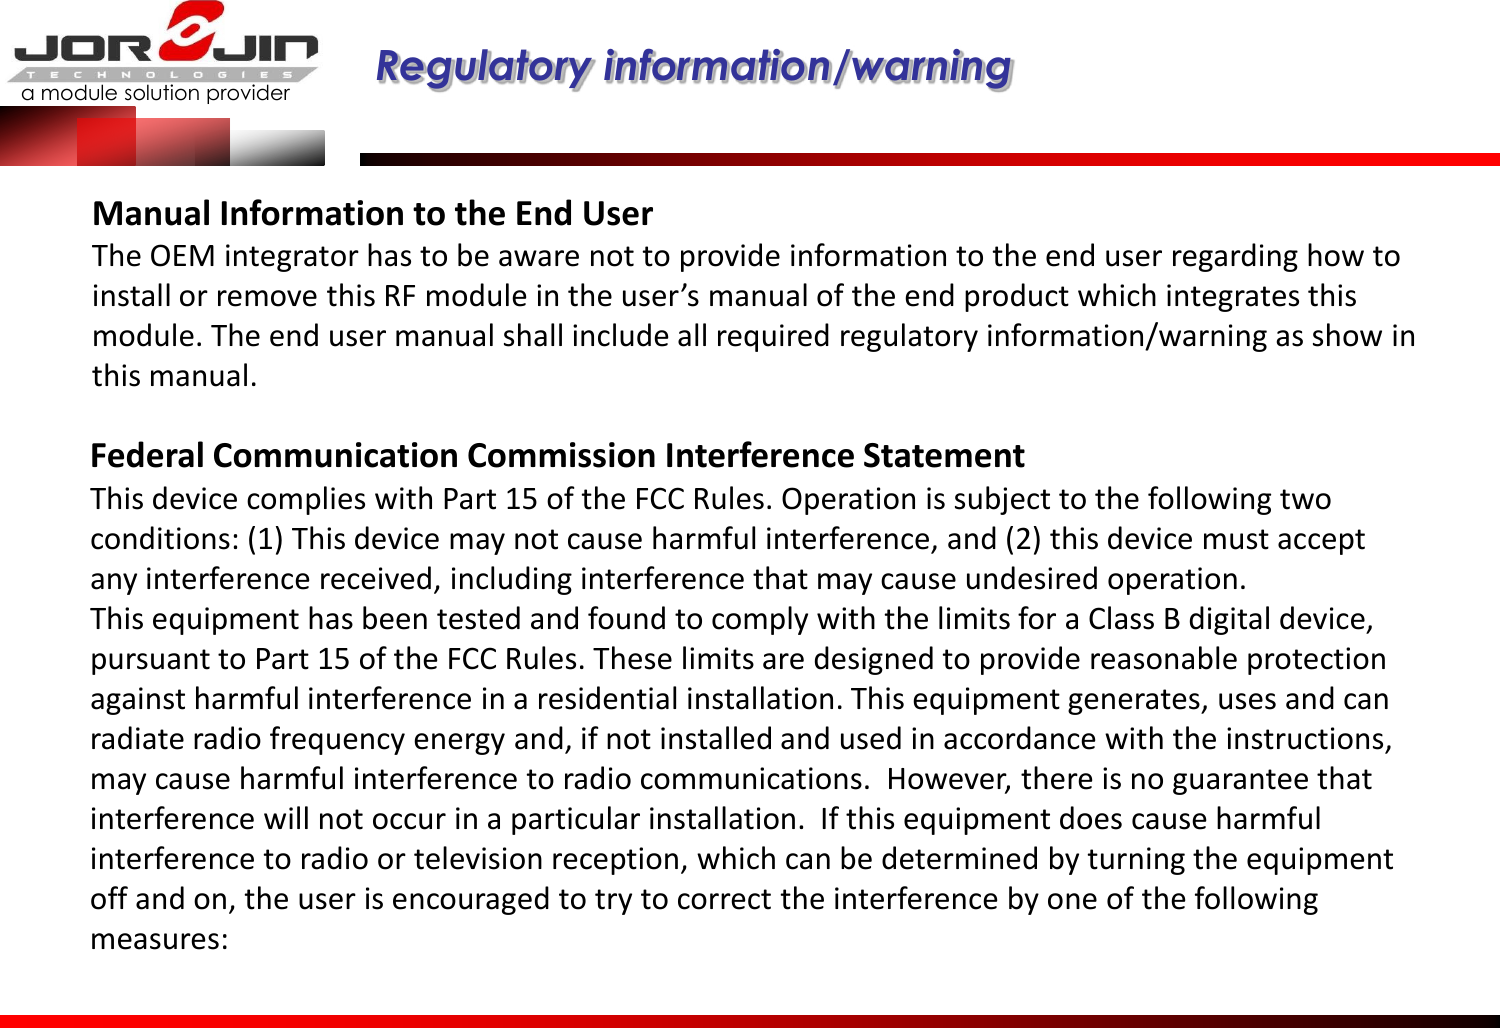 a module solution provider  Regulatory information/warning   Manual Information to the End User  The OEM integrator has to be aware not to provide information to the end user regarding how to install or remove this RF module in the user’s manual of the end product which integrates this module. The end user manual shall include all required regulatory information/warning as show in this manual. Federal Communication Commission Interference Statement  This device complies with Part 15 of the FCC Rules. Operation is subject to the following two conditions: (1) This device may not cause harmful interference, and (2) this device must accept any interference received, including interference that may cause undesired operation.  This equipment has been tested and found to comply with the limits for a Class B digital device, pursuant to Part 15 of the FCC Rules. These limits are designed to provide reasonable protection against harmful interference in a residential installation. This equipment generates, uses and can radiate radio frequency energy and, if not installed and used in accordance with the instructions, may cause harmful interference to radio communications.  However, there is no guarantee that interference will not occur in a particular installation.  If this equipment does cause harmful interference to radio or television reception, which can be determined by turning the equipment off and on, the user is encouraged to try to correct the interference by one of the following measures:   